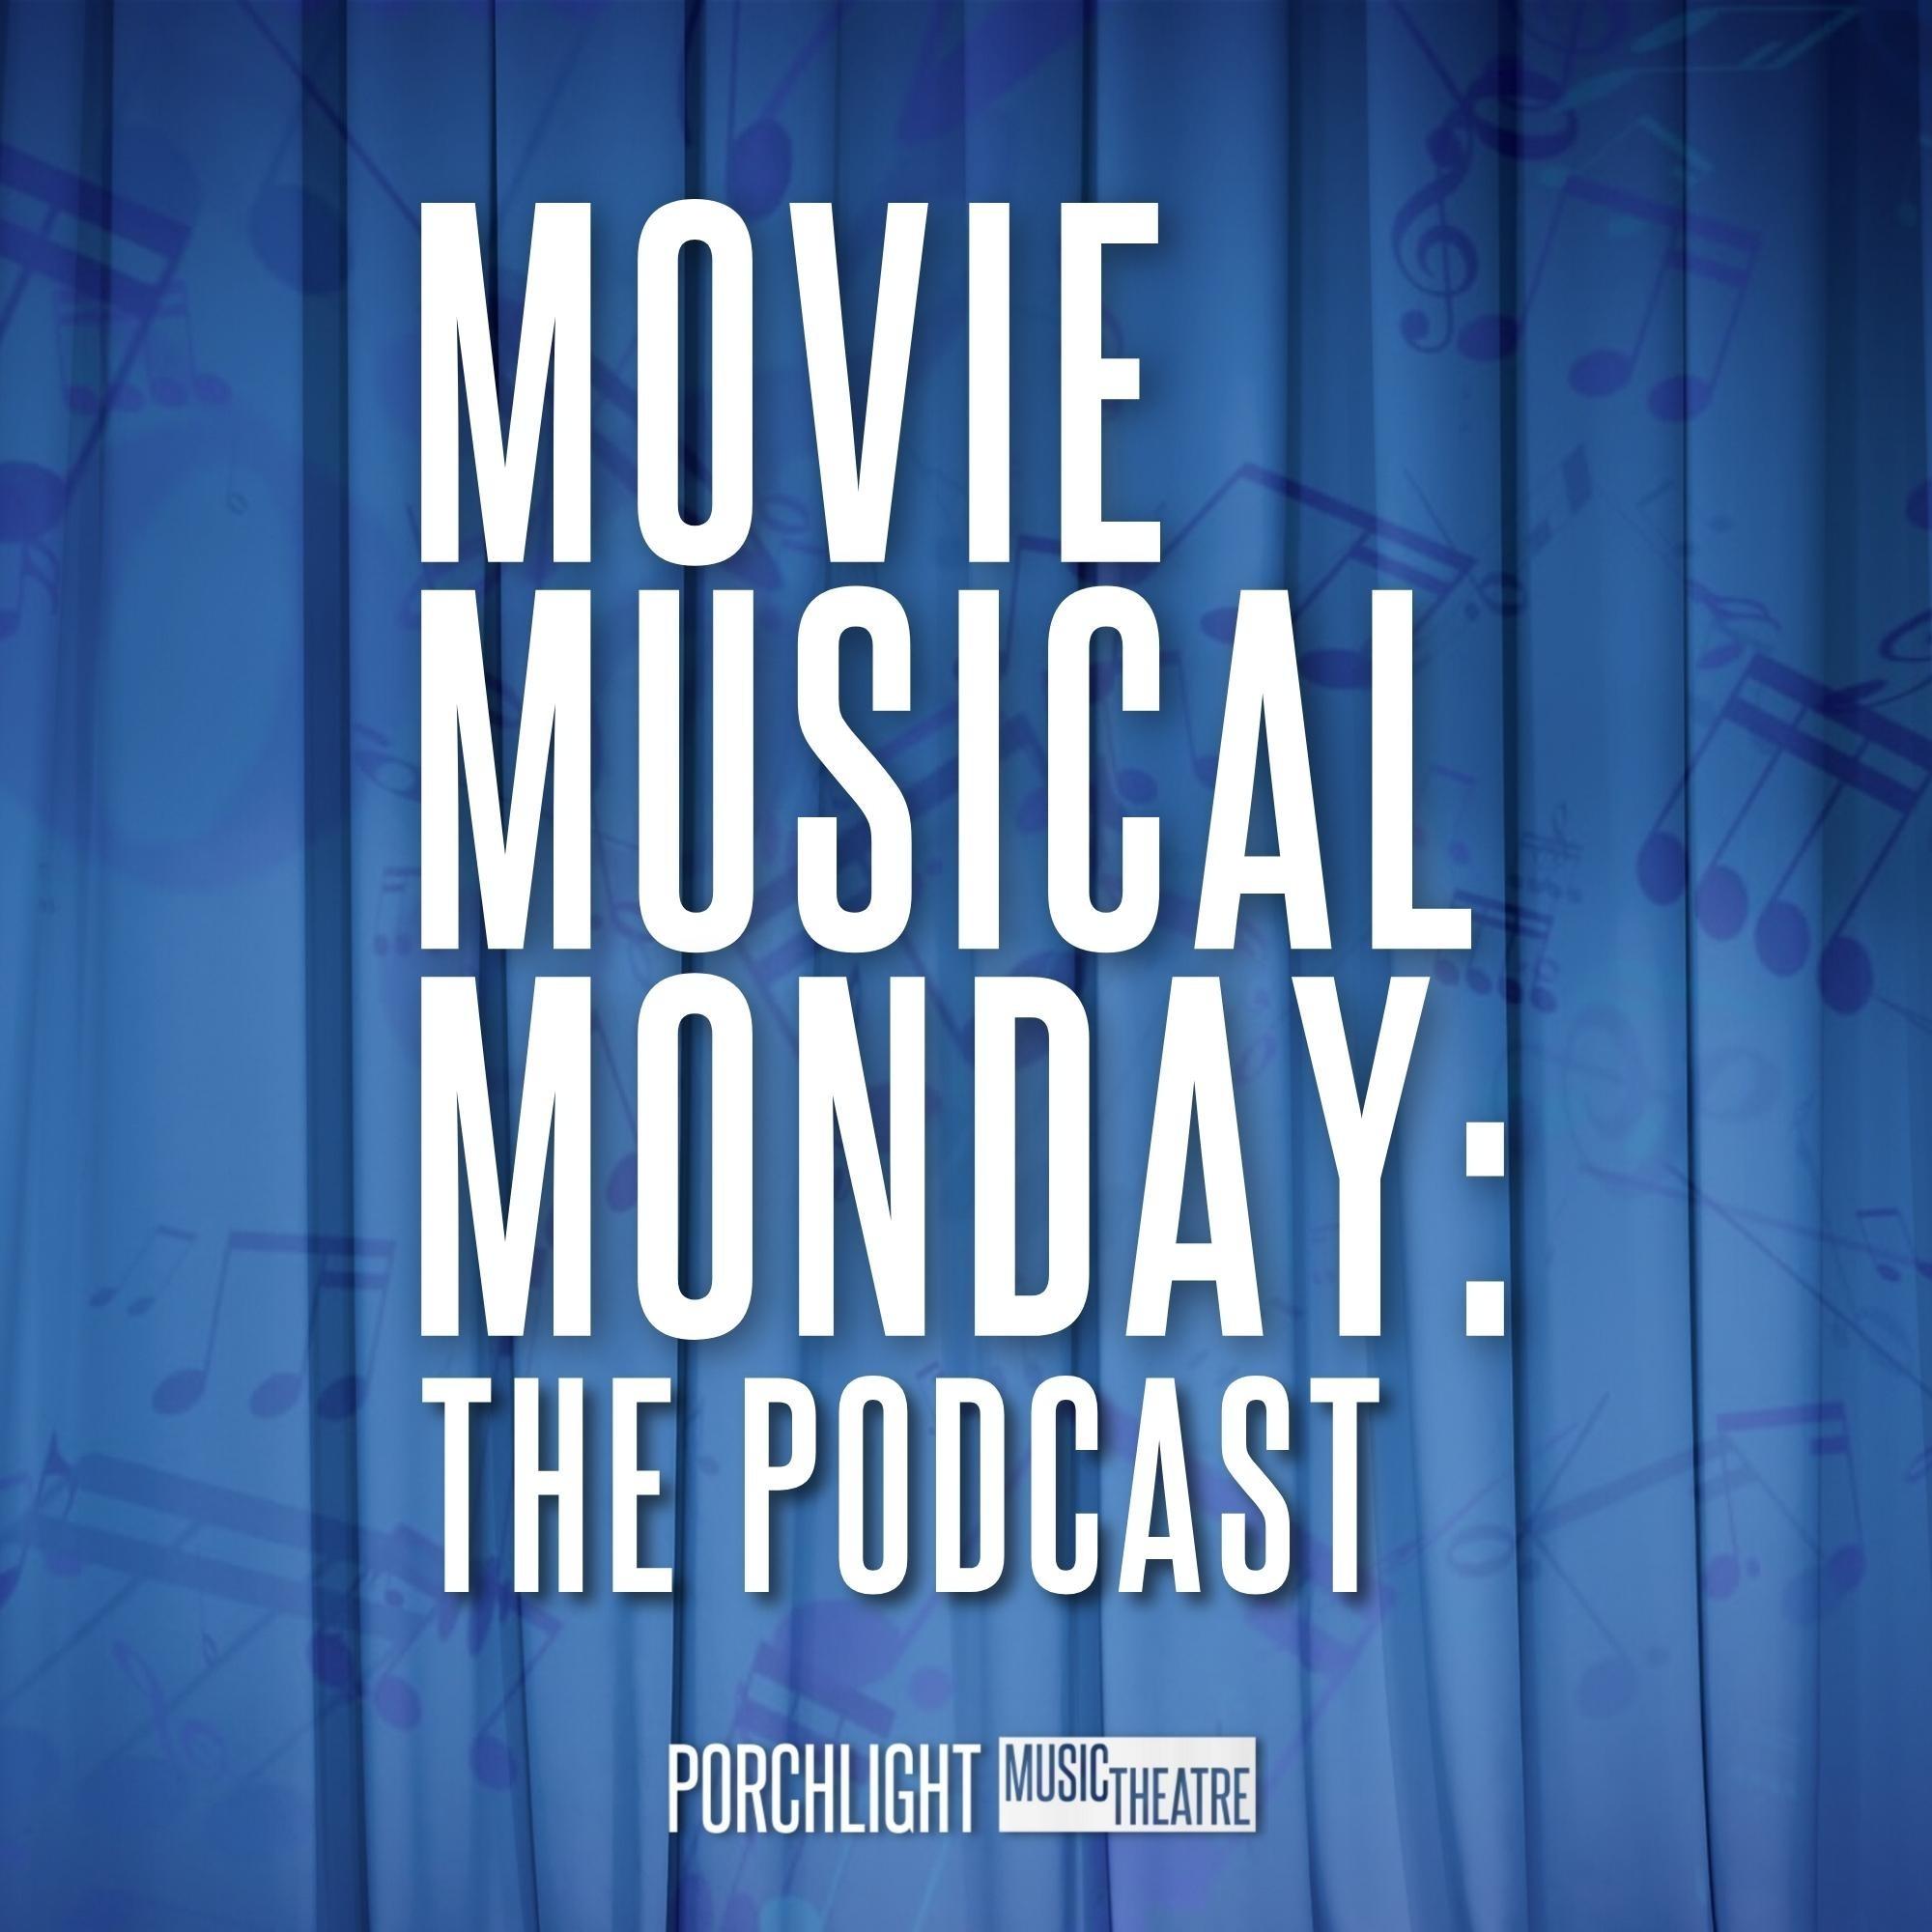 Movie Musical Monday: The Podcast